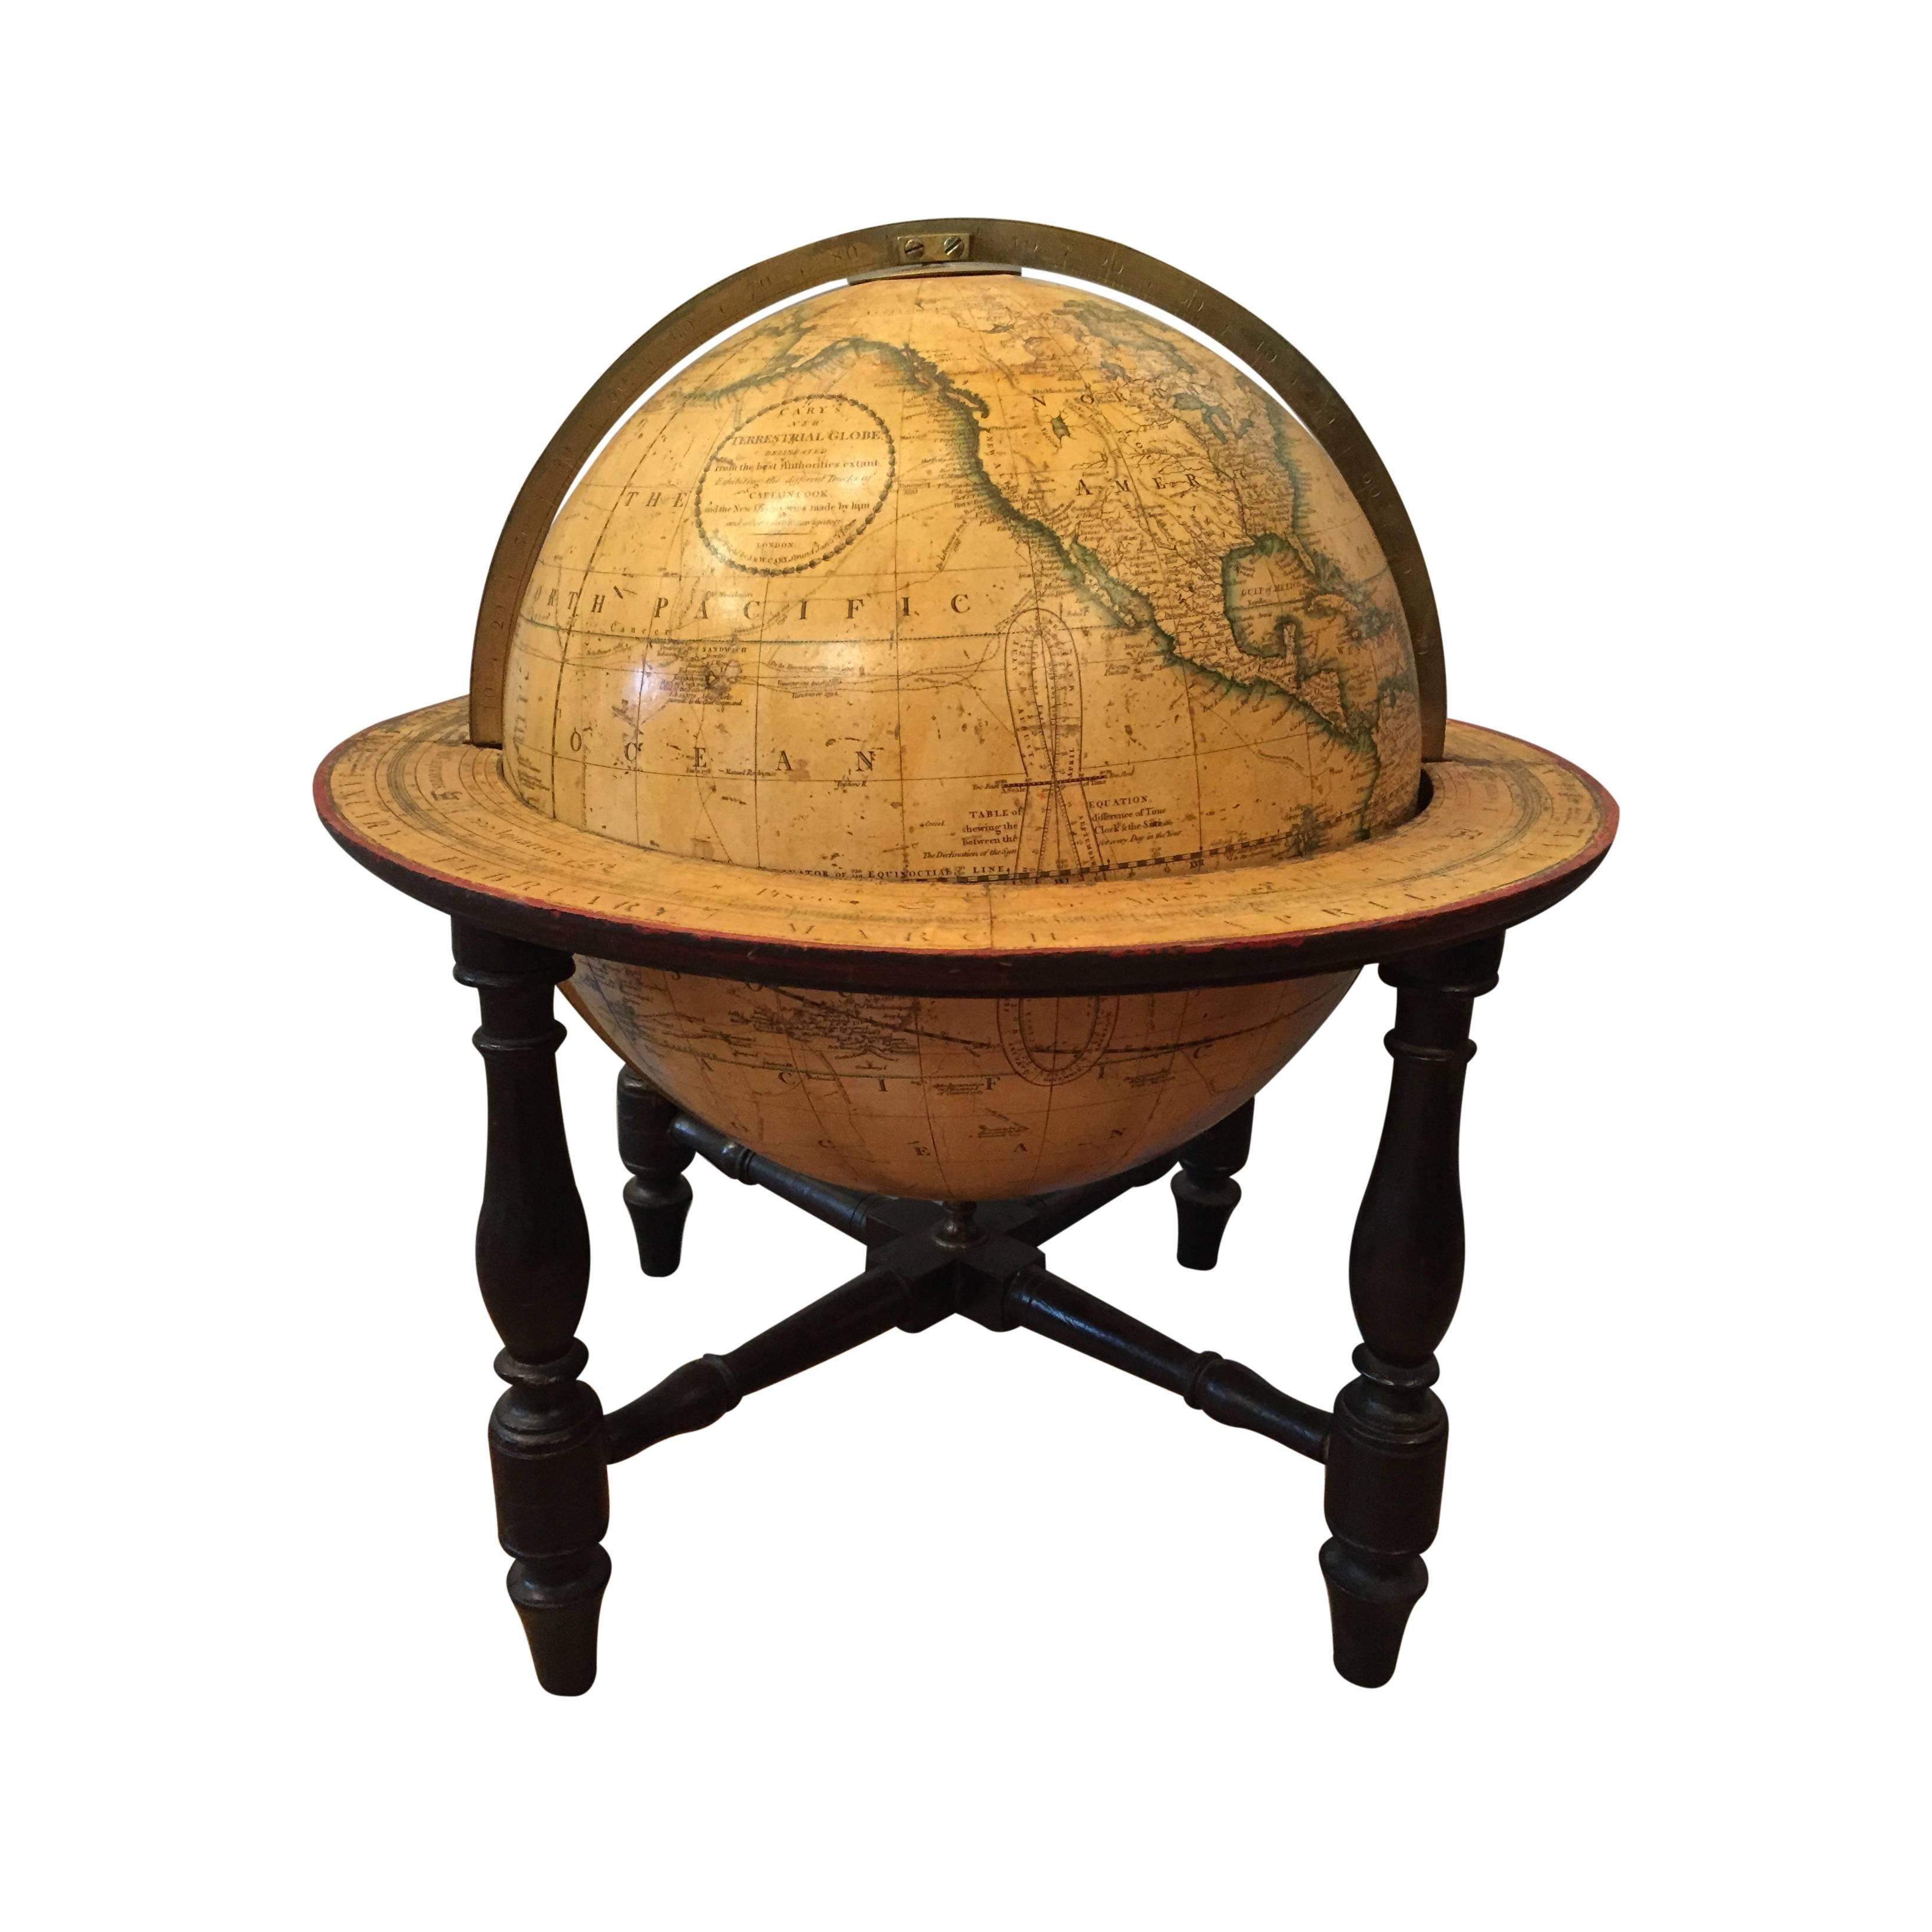 This gorgeous pair of globes was made by preeminent globe makers John and William Cary of London. These two brothers are known as the greatest globe makers of their era, which was at the turn of the 19th century.

These precise instruments were